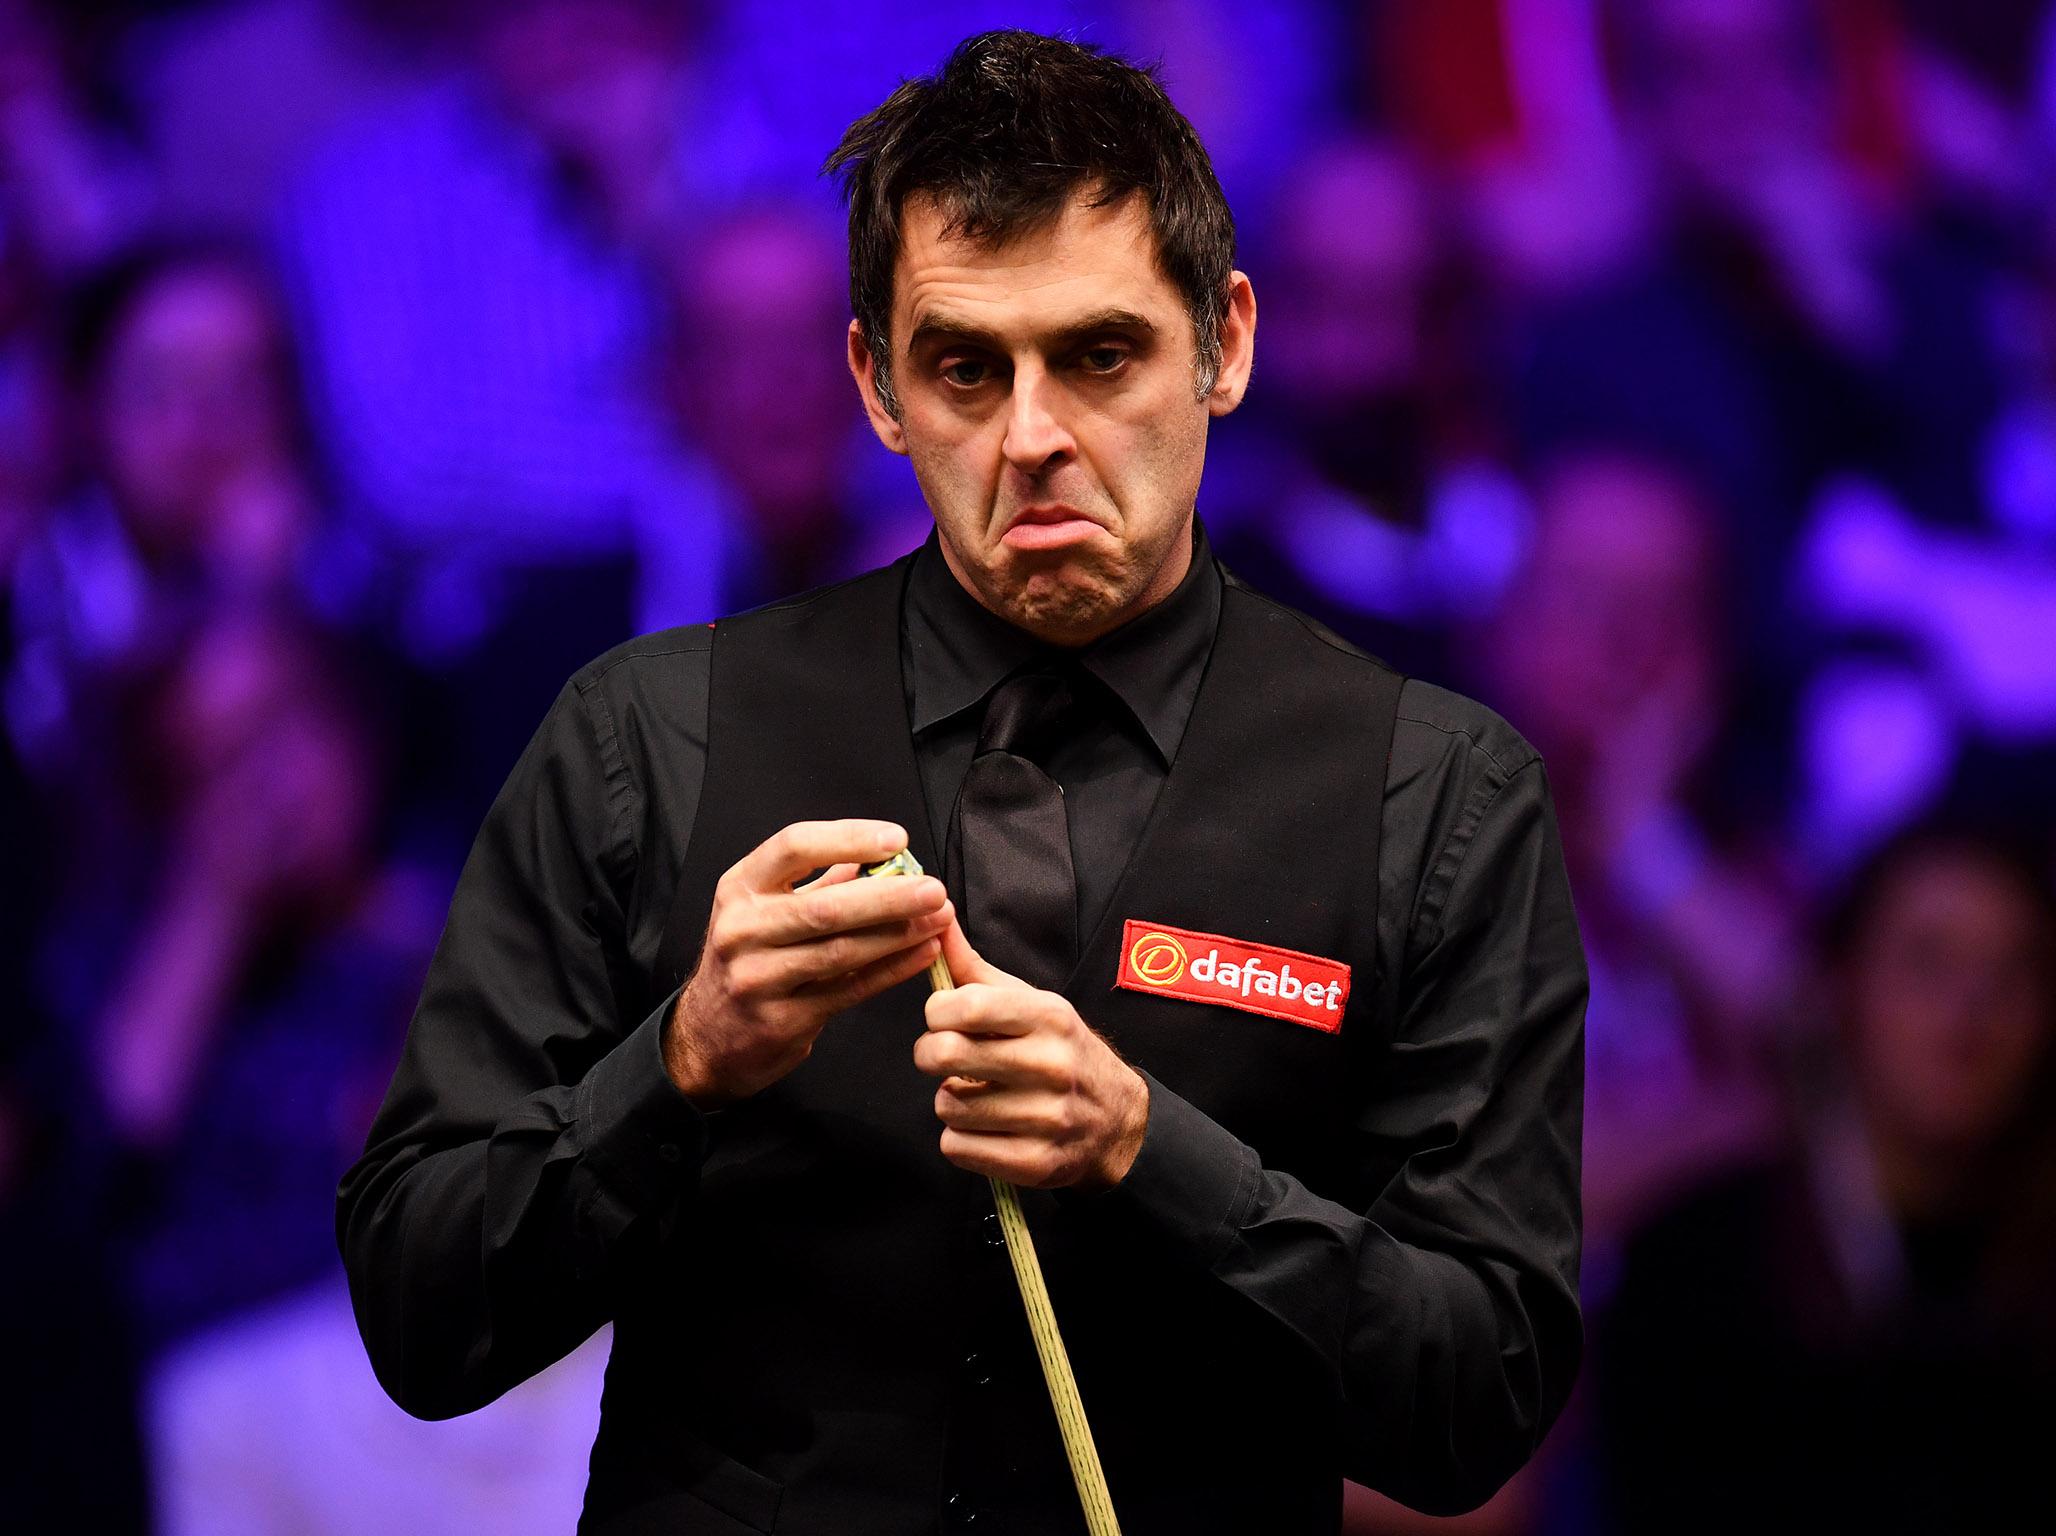 Ronnie O'Sullivan begins the tournament as the favourite to win